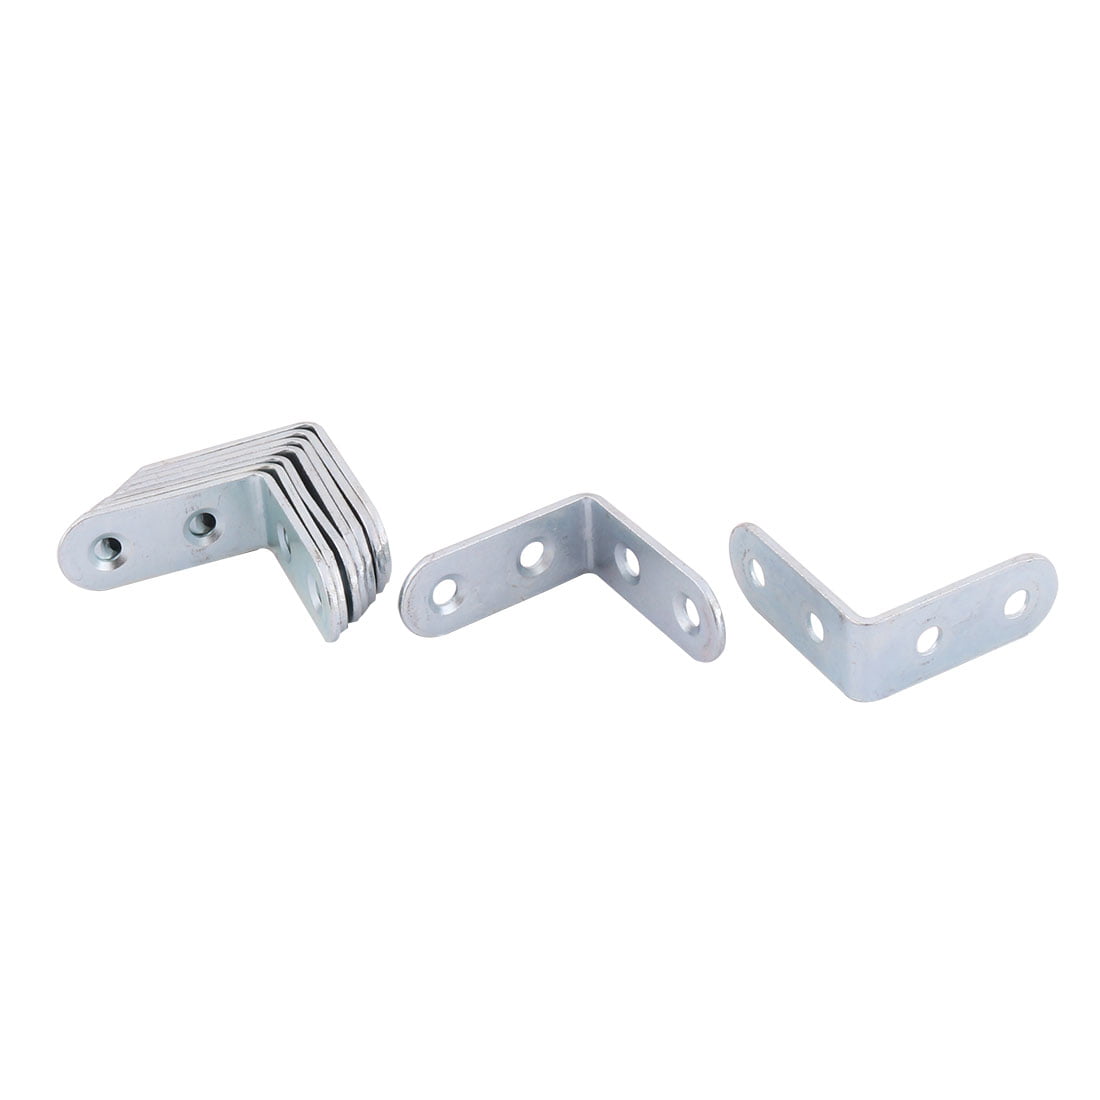 Uxcell 9 Piece 40 x 40mm Metal Table Fixing Corner Brace Joint Angle ...